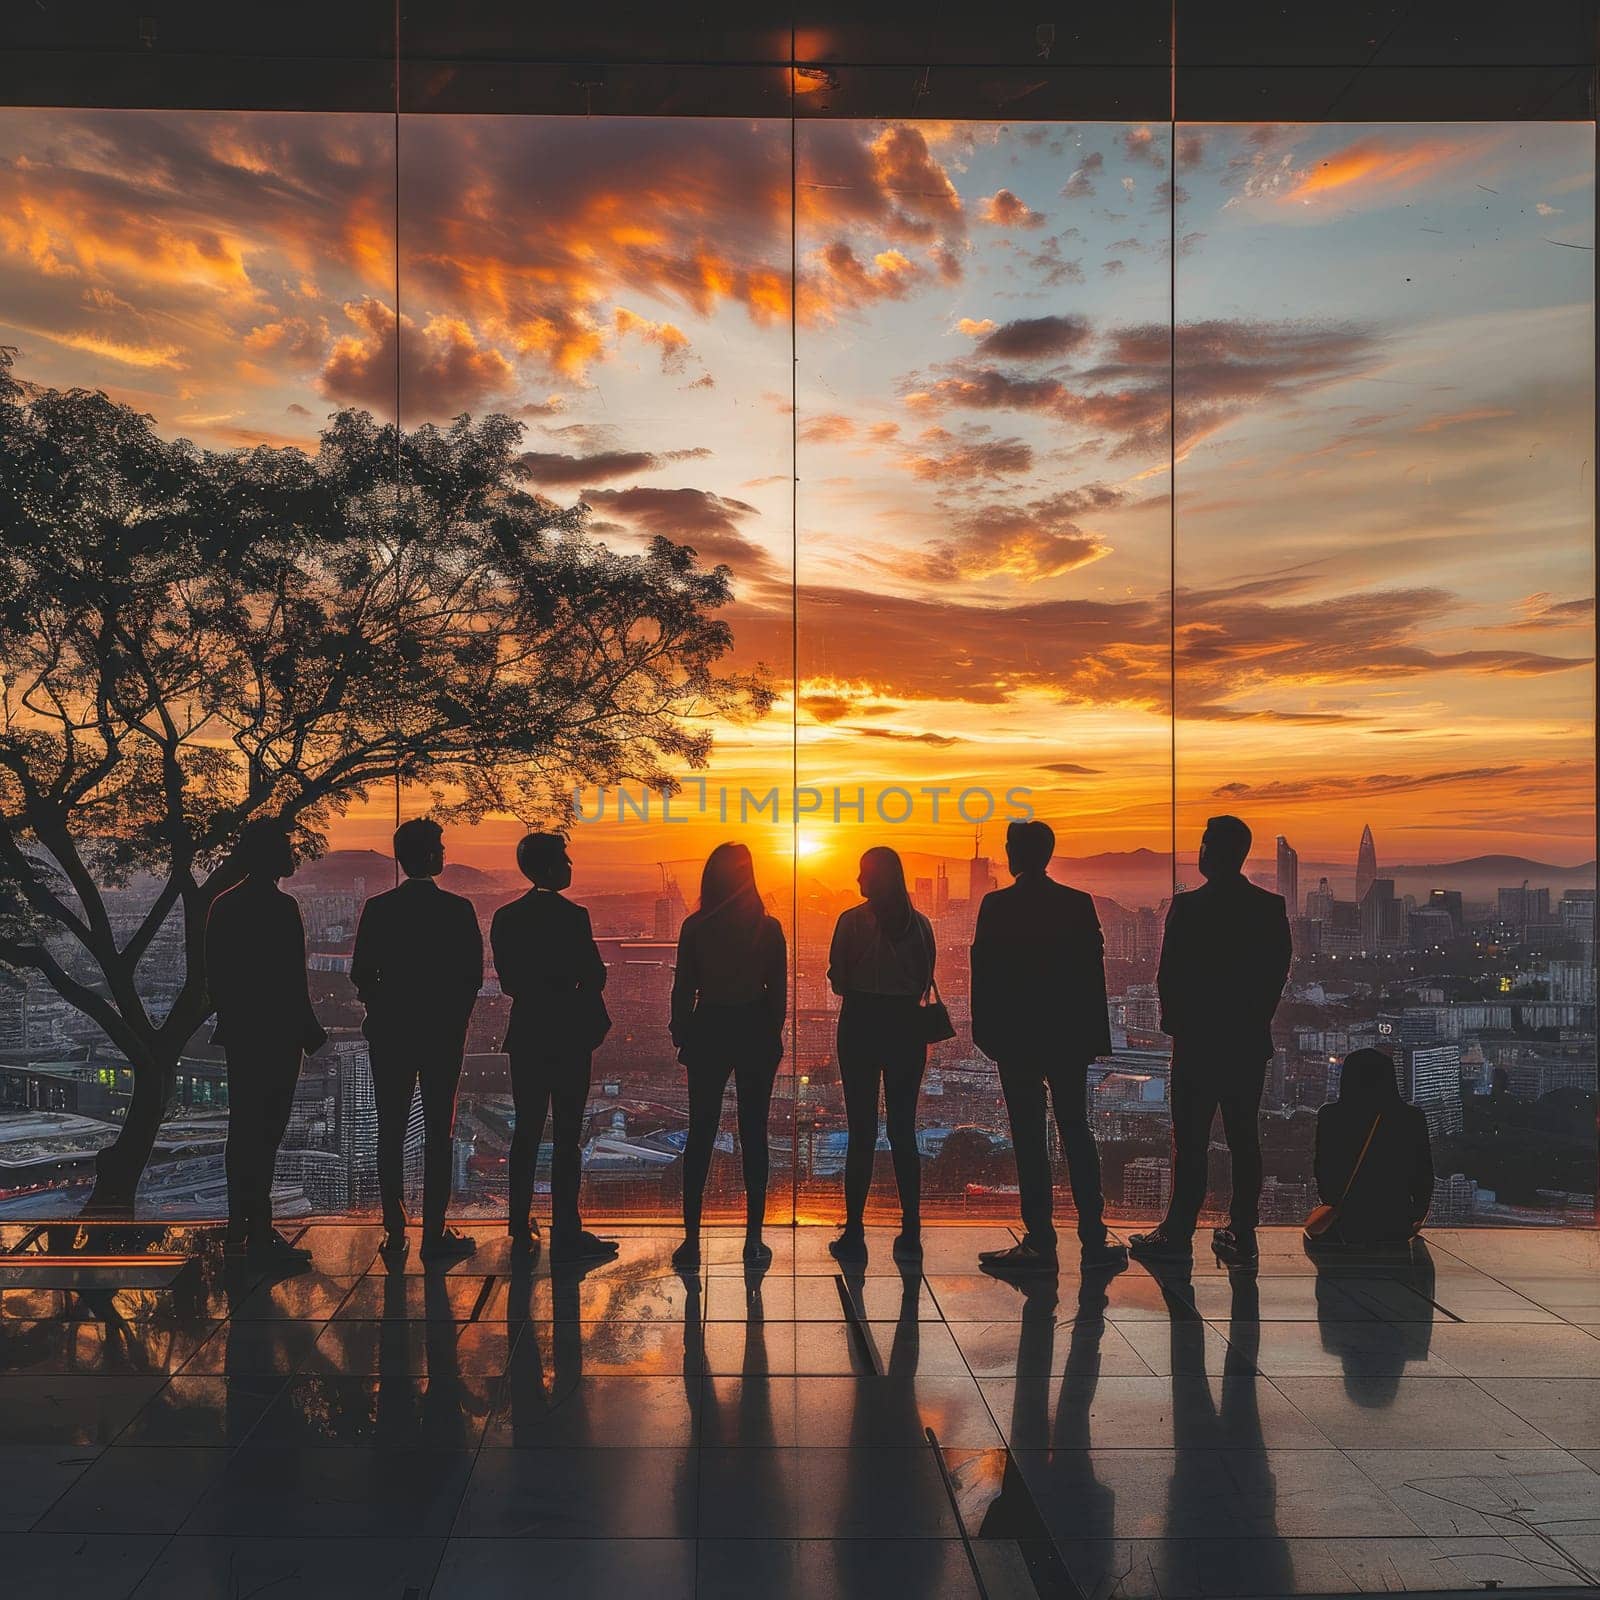 Business people meeting outdoor and sunset background.